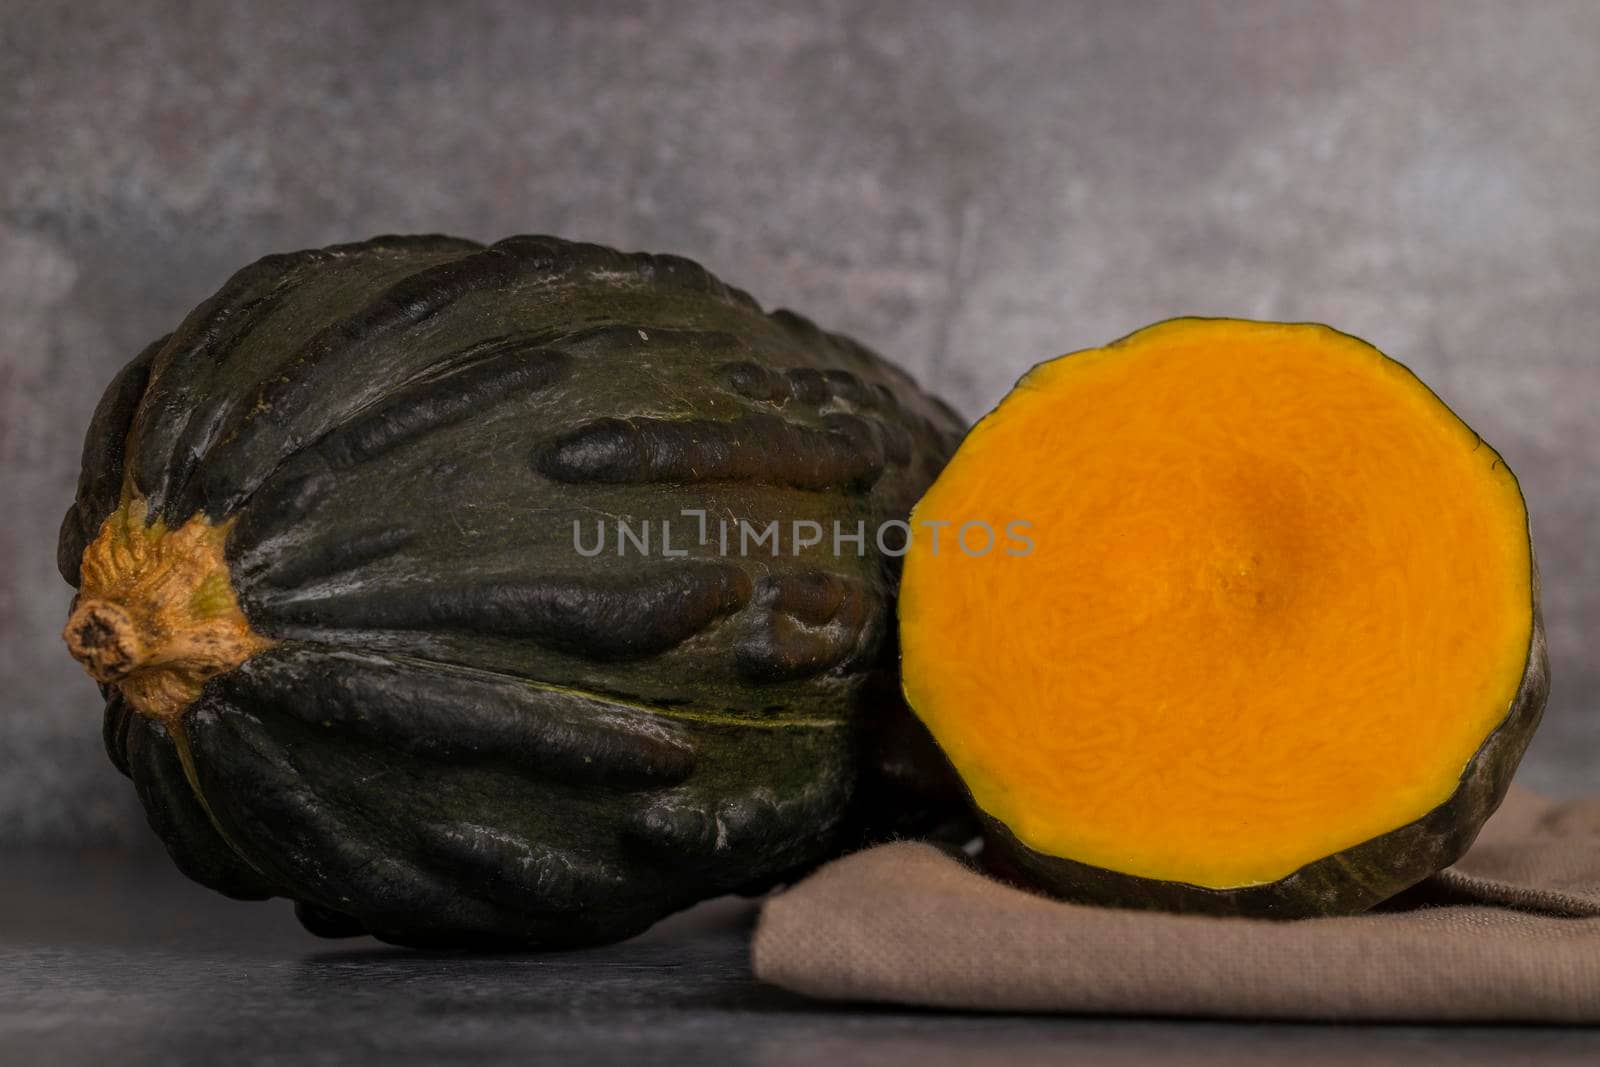 Typical pumpkin from Peru, also called as: Zapallo Loche or Lambayeque.